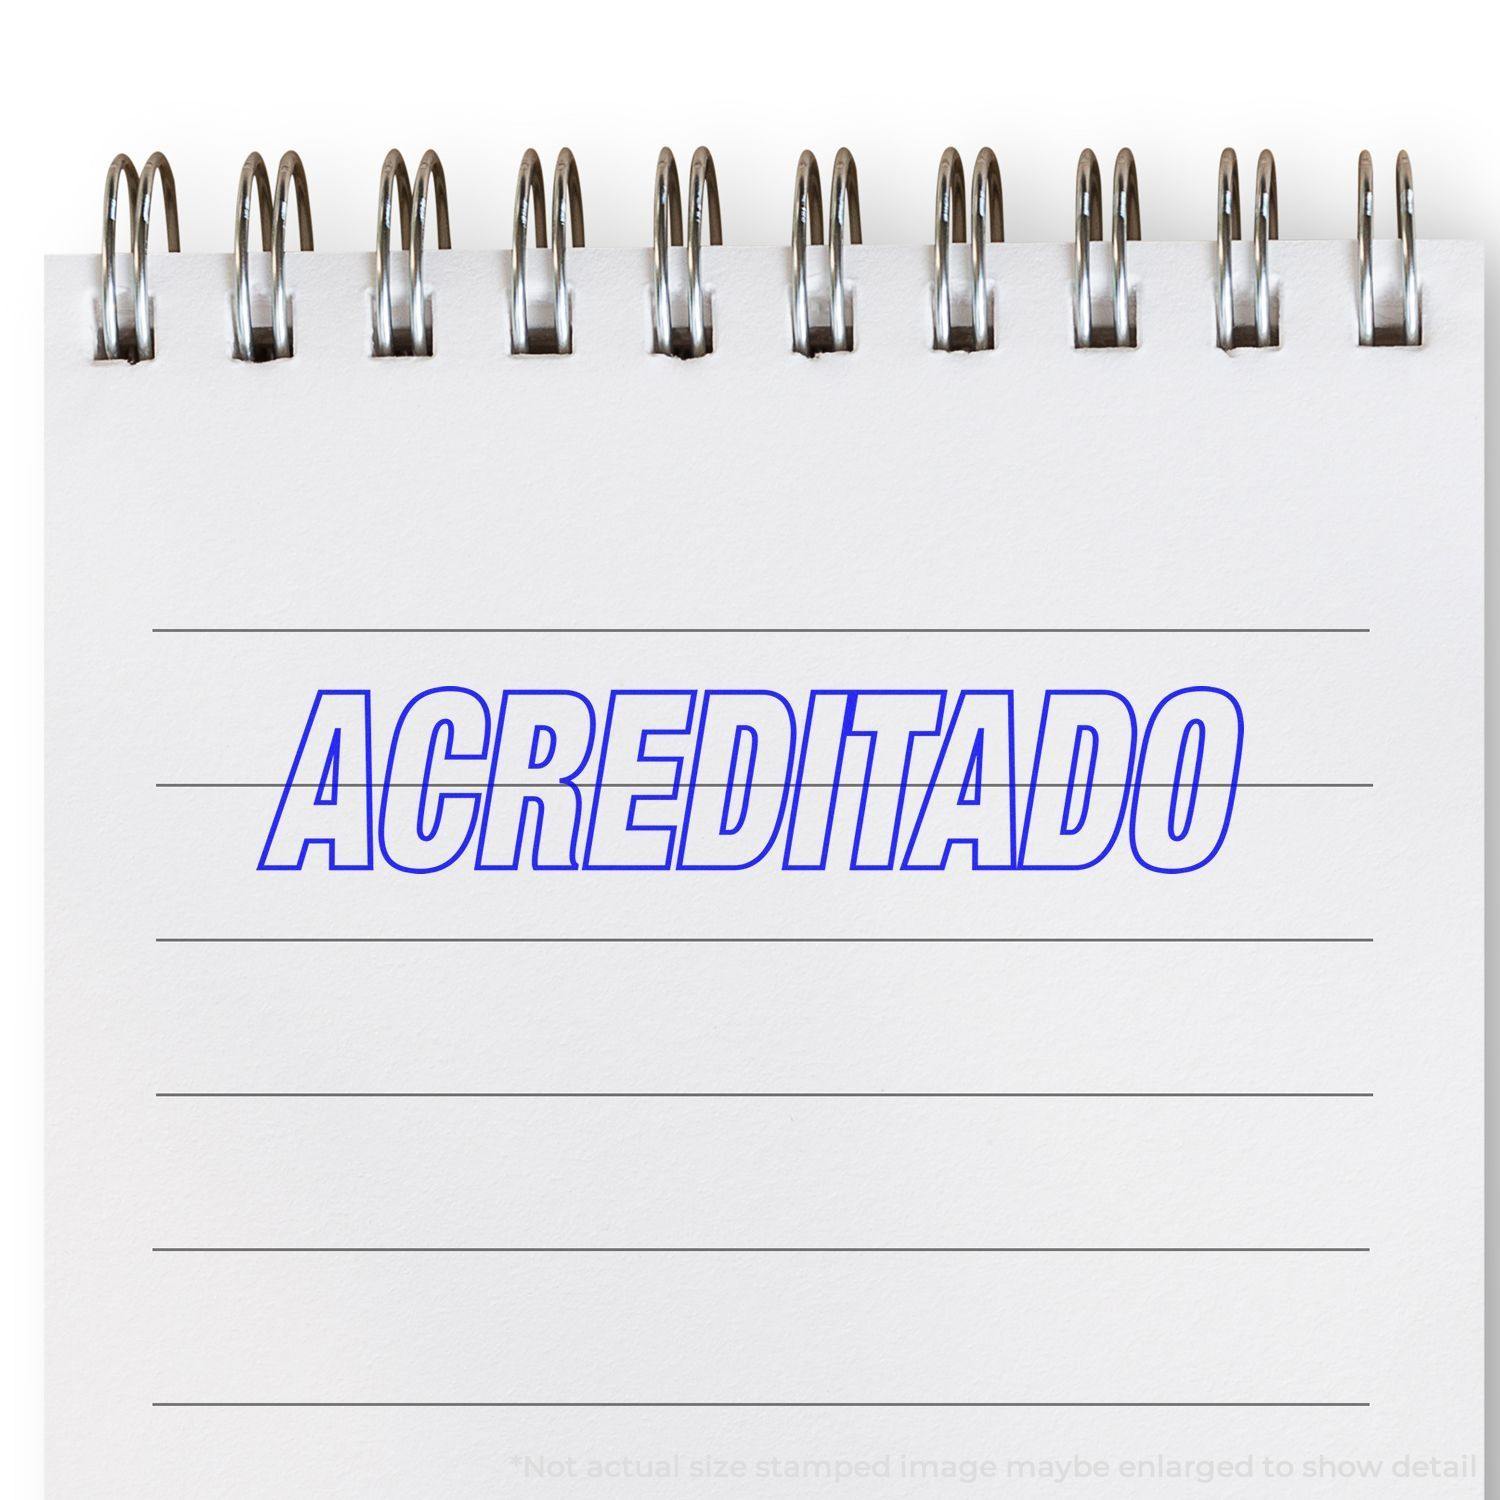 A stock office pre-inked stamp with a stamped image showing how the text "ACREDITADO" in an outline font is displayed after stamping.